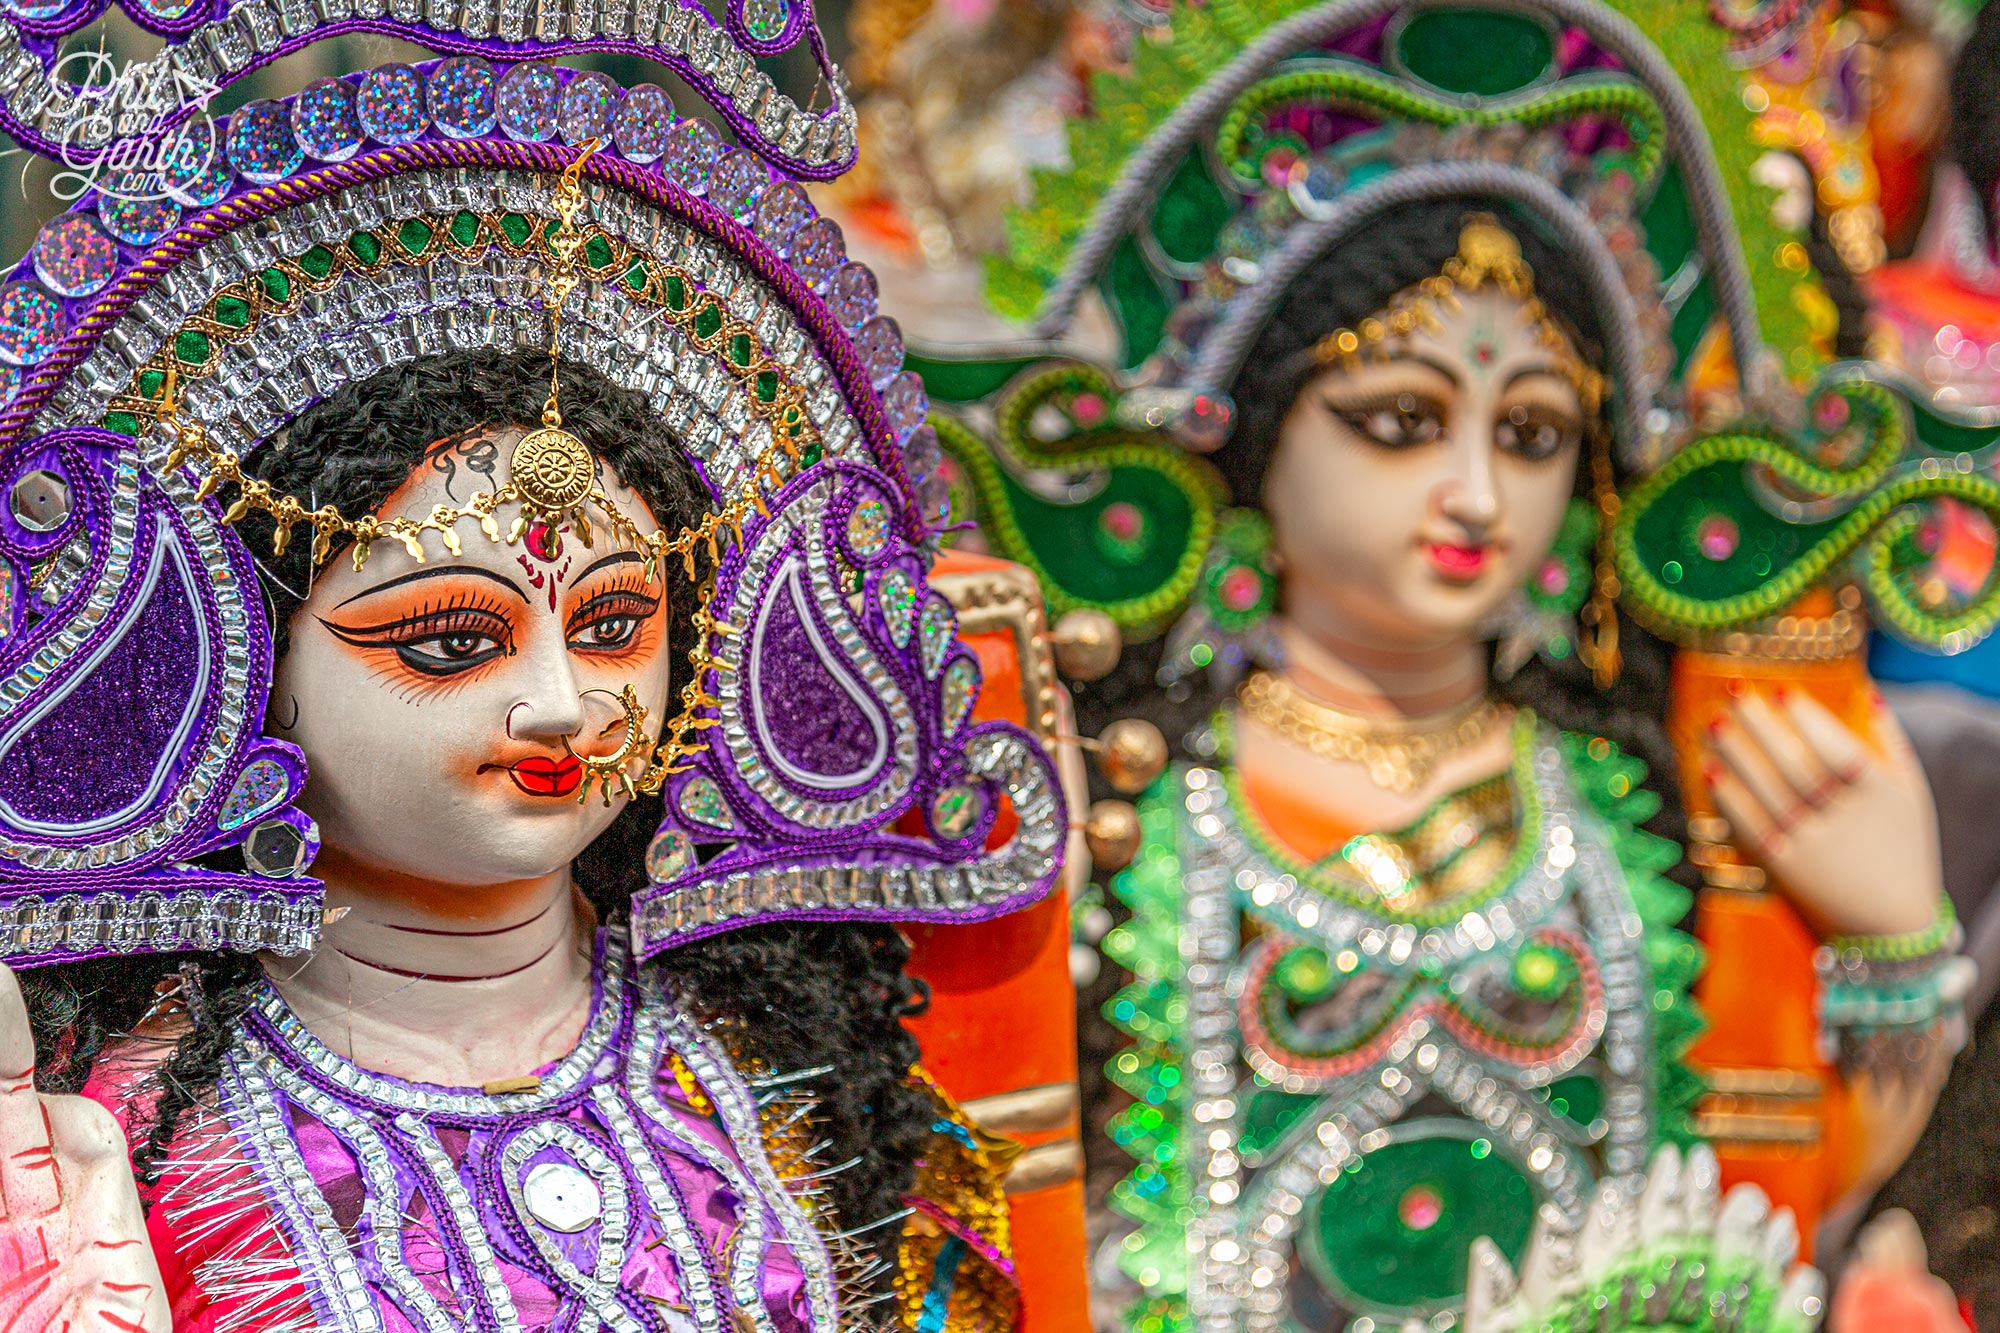 Look at all the gorgeous detail on these goddess statues